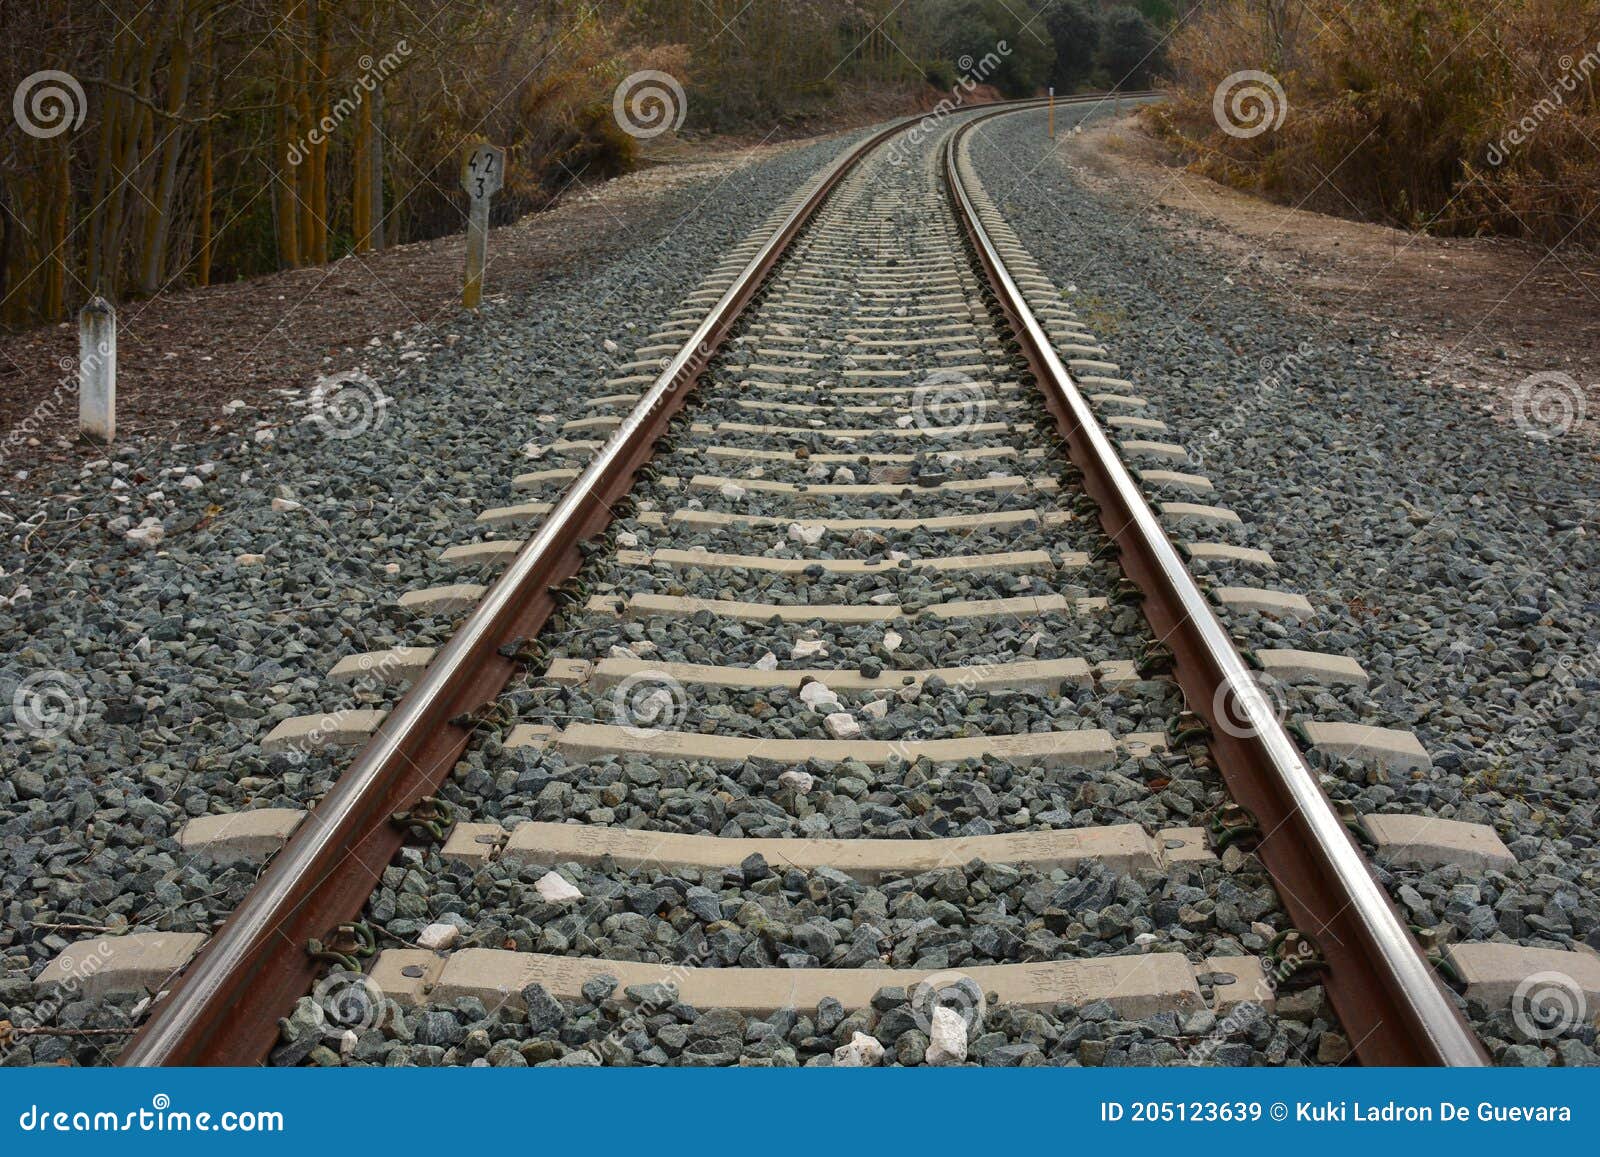 conventional railway track